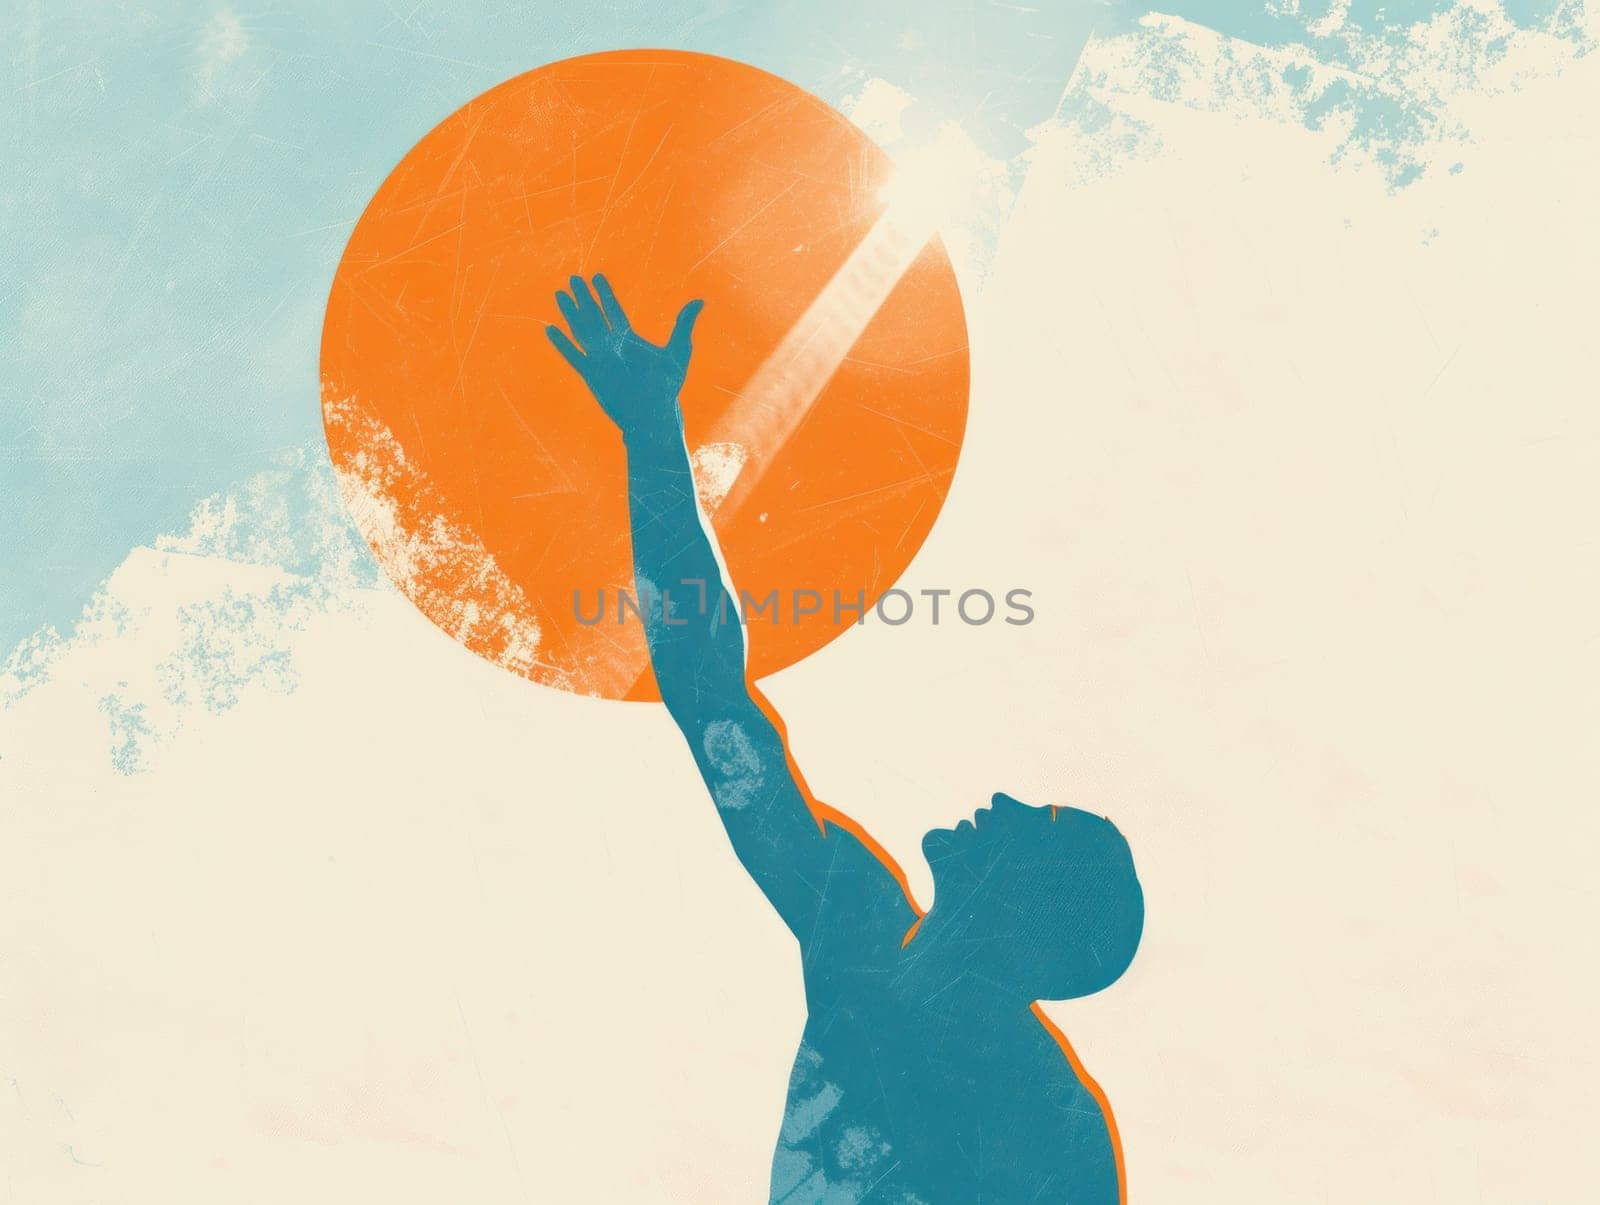 Man reaching up to catch vibrant orange and blue ball in the air as a form of artistic expression